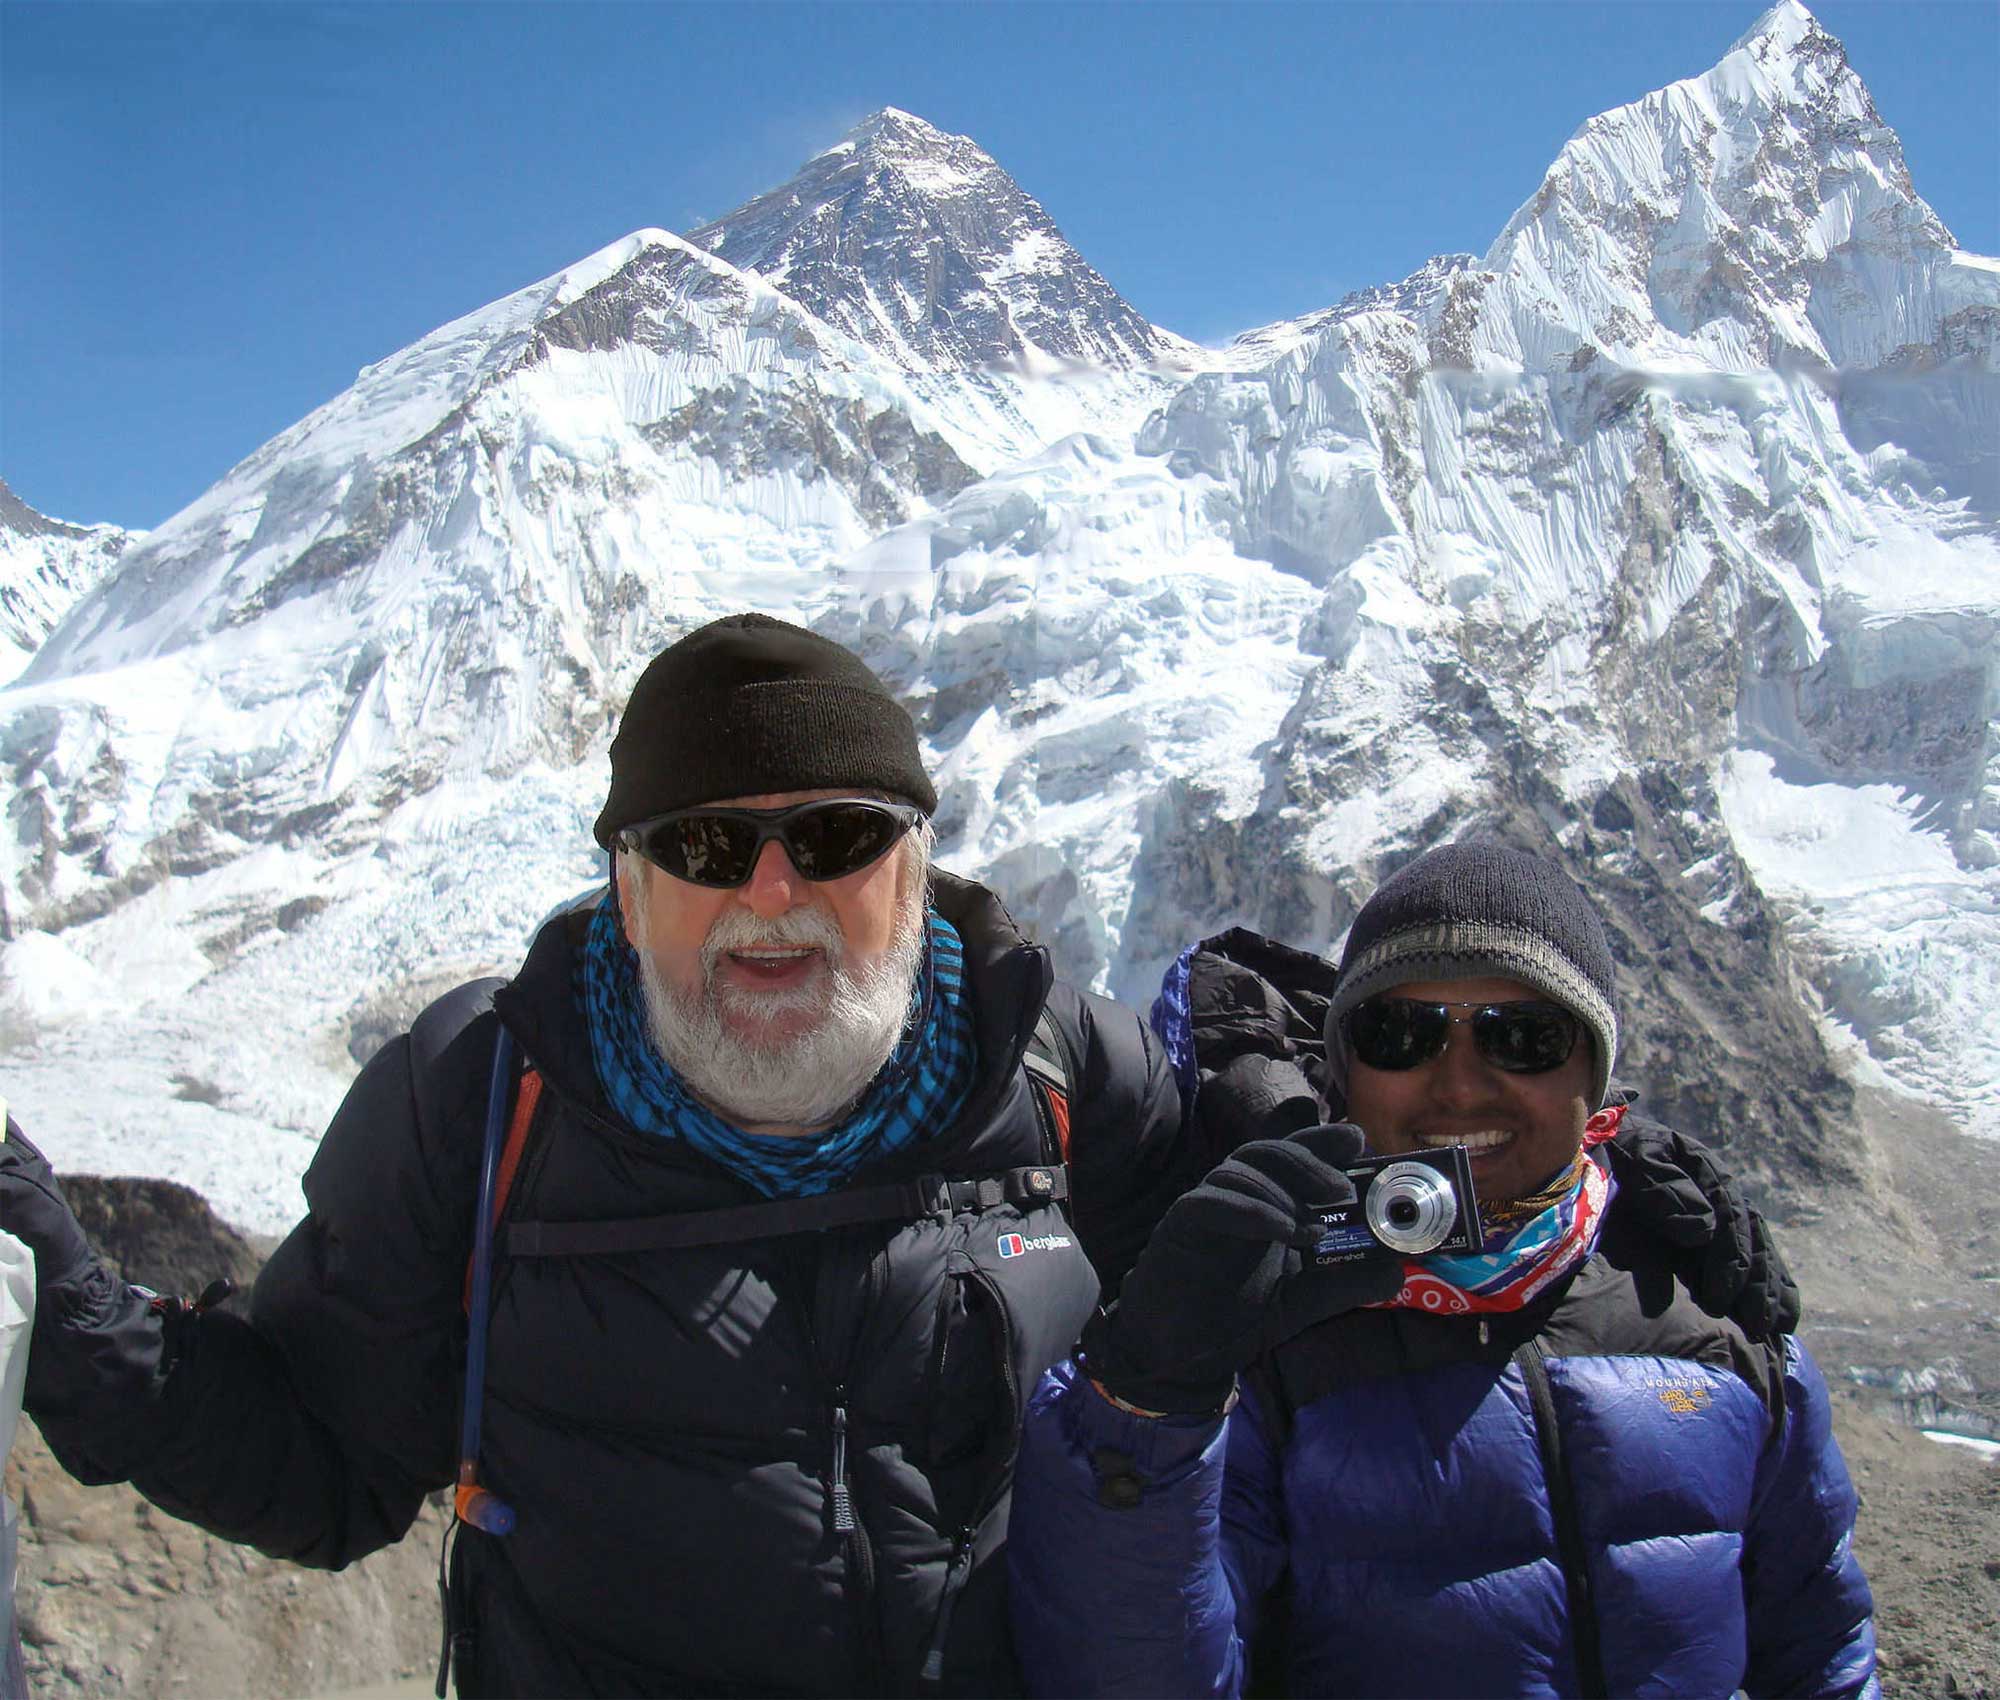 Michael Hobby away from CJS. (Yes it is Mount Everest. )